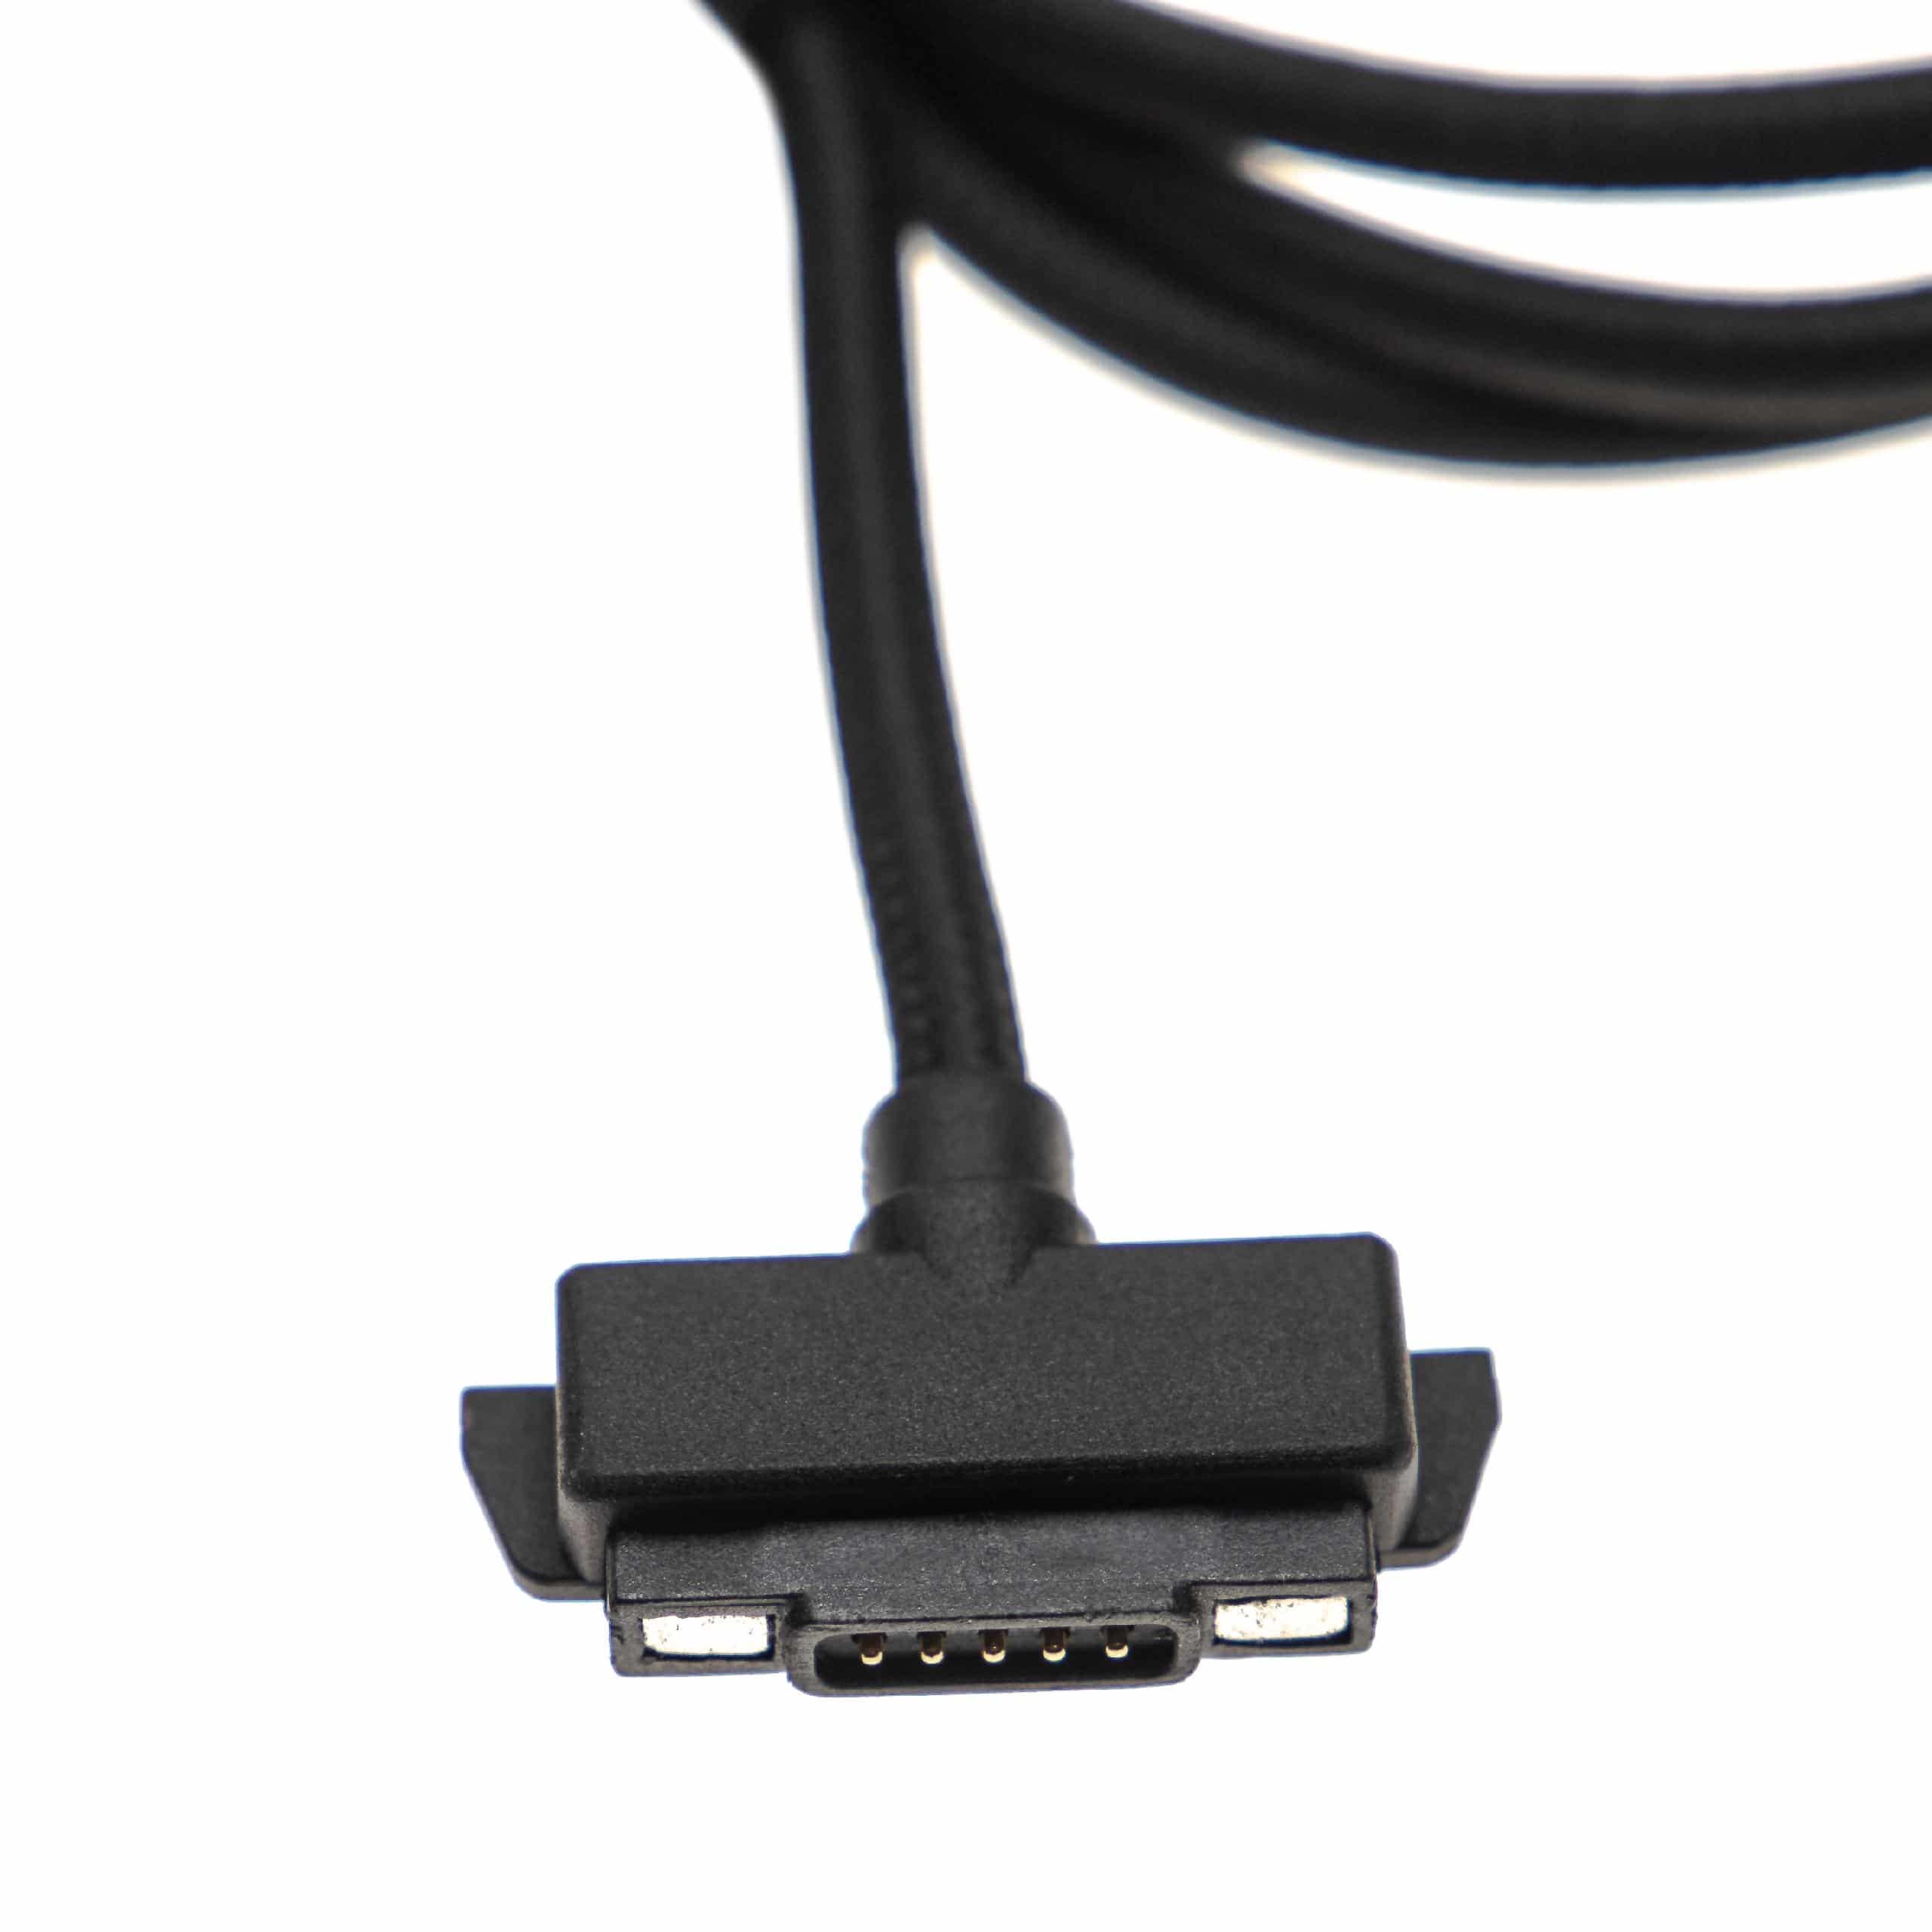 USB Charging Cable suitable for Sonim XP5 Smartphone, Mobile Phone, Magnetic